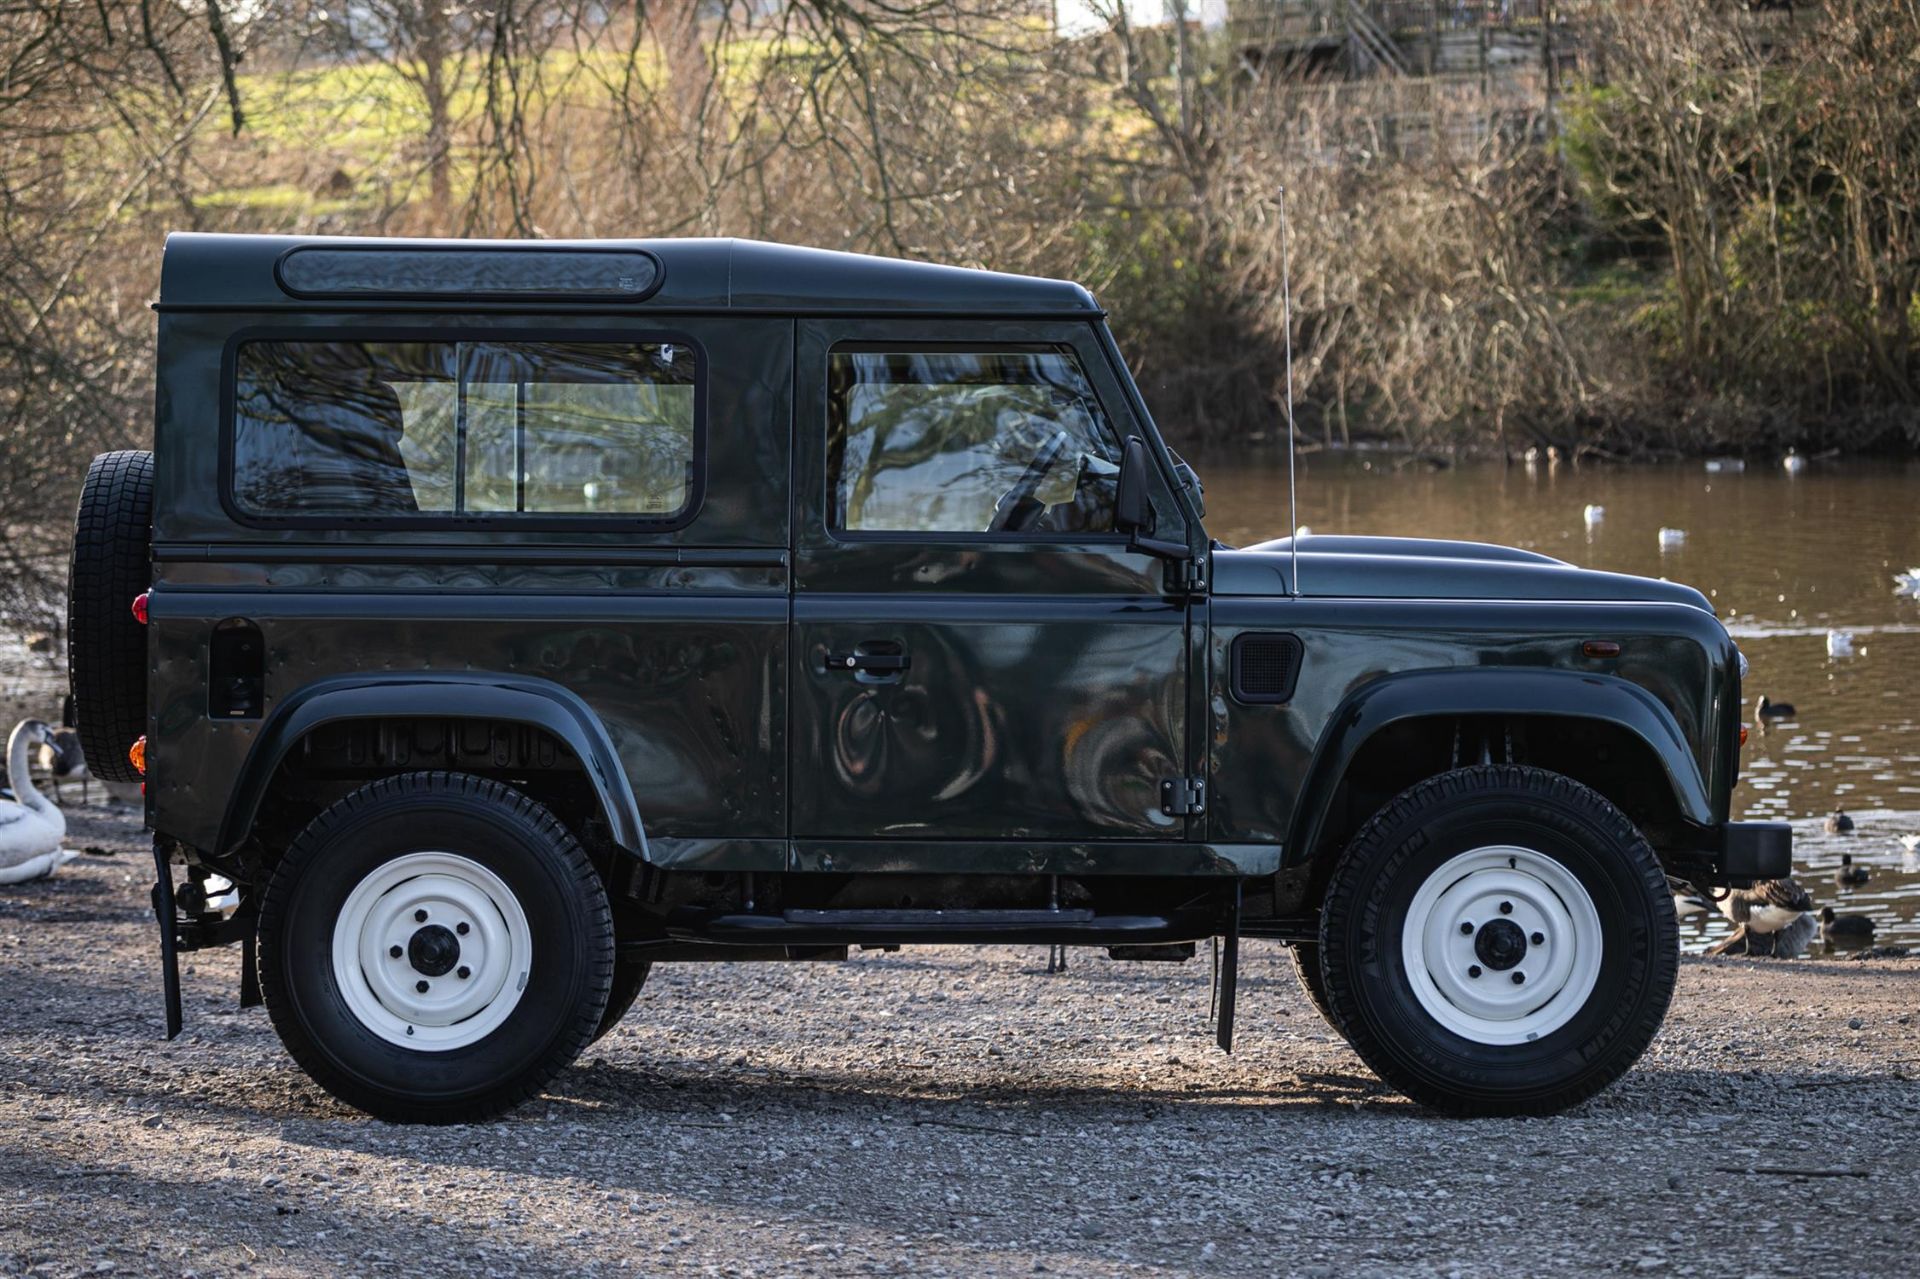 2008 Land Rover Defender 90 TDCi 2.4 County Station Wagon - Image 5 of 10